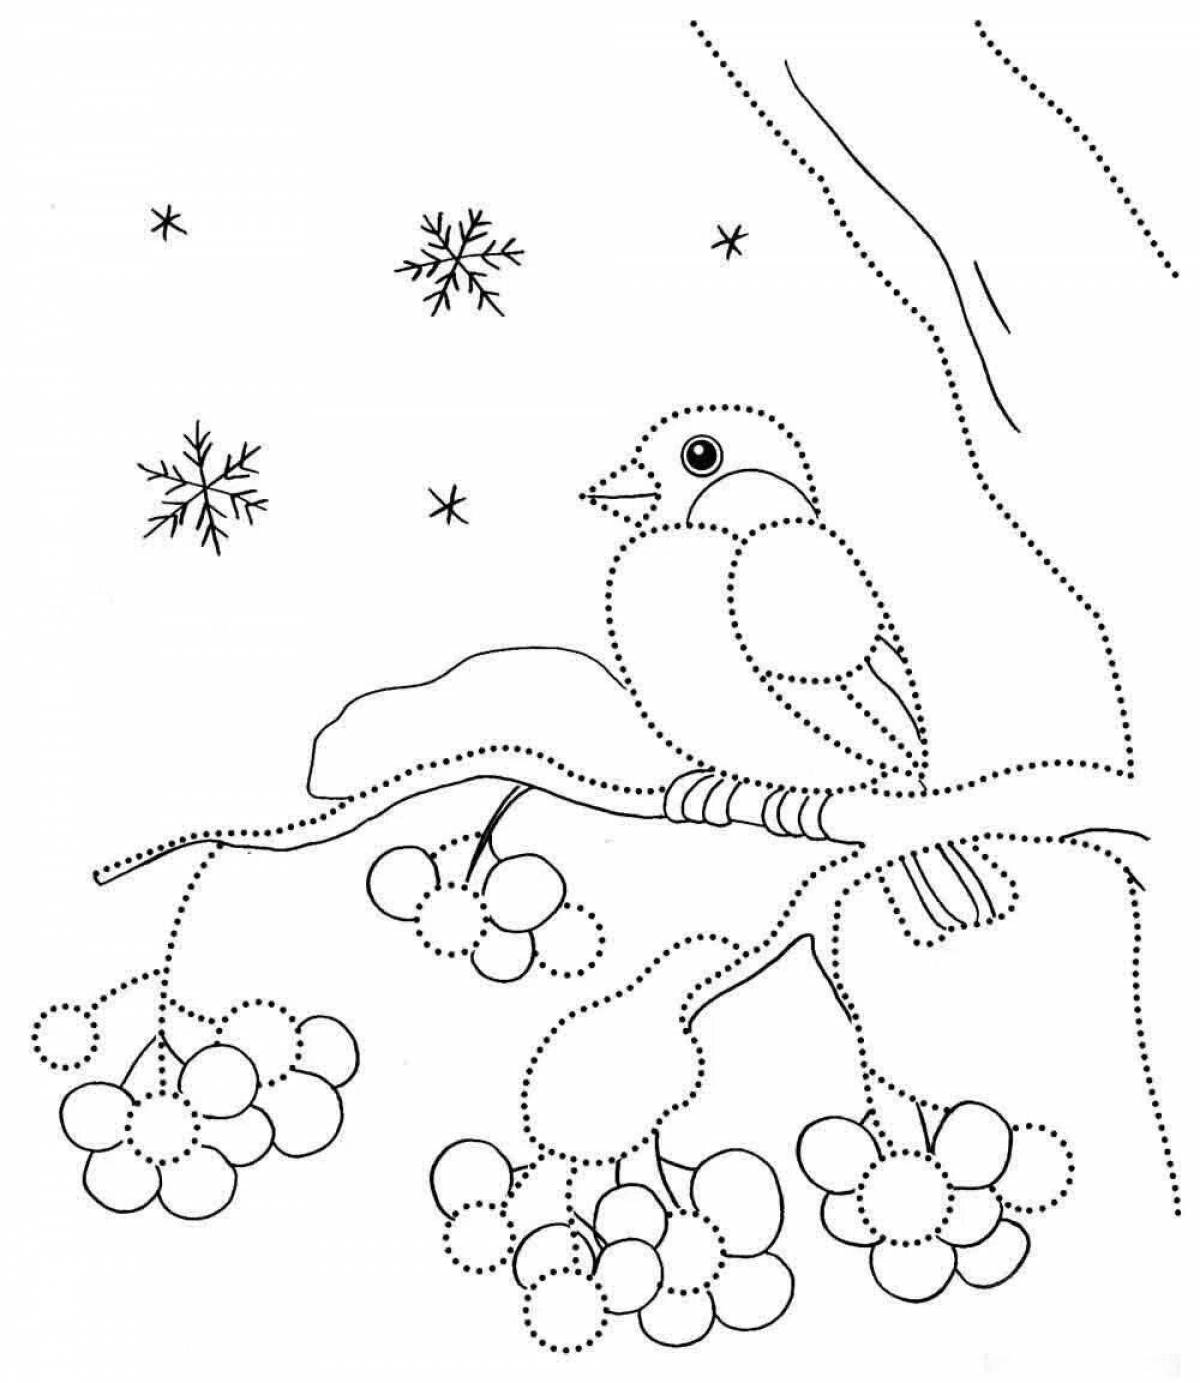 Colouring bright wintering birds for children 2-3 years old